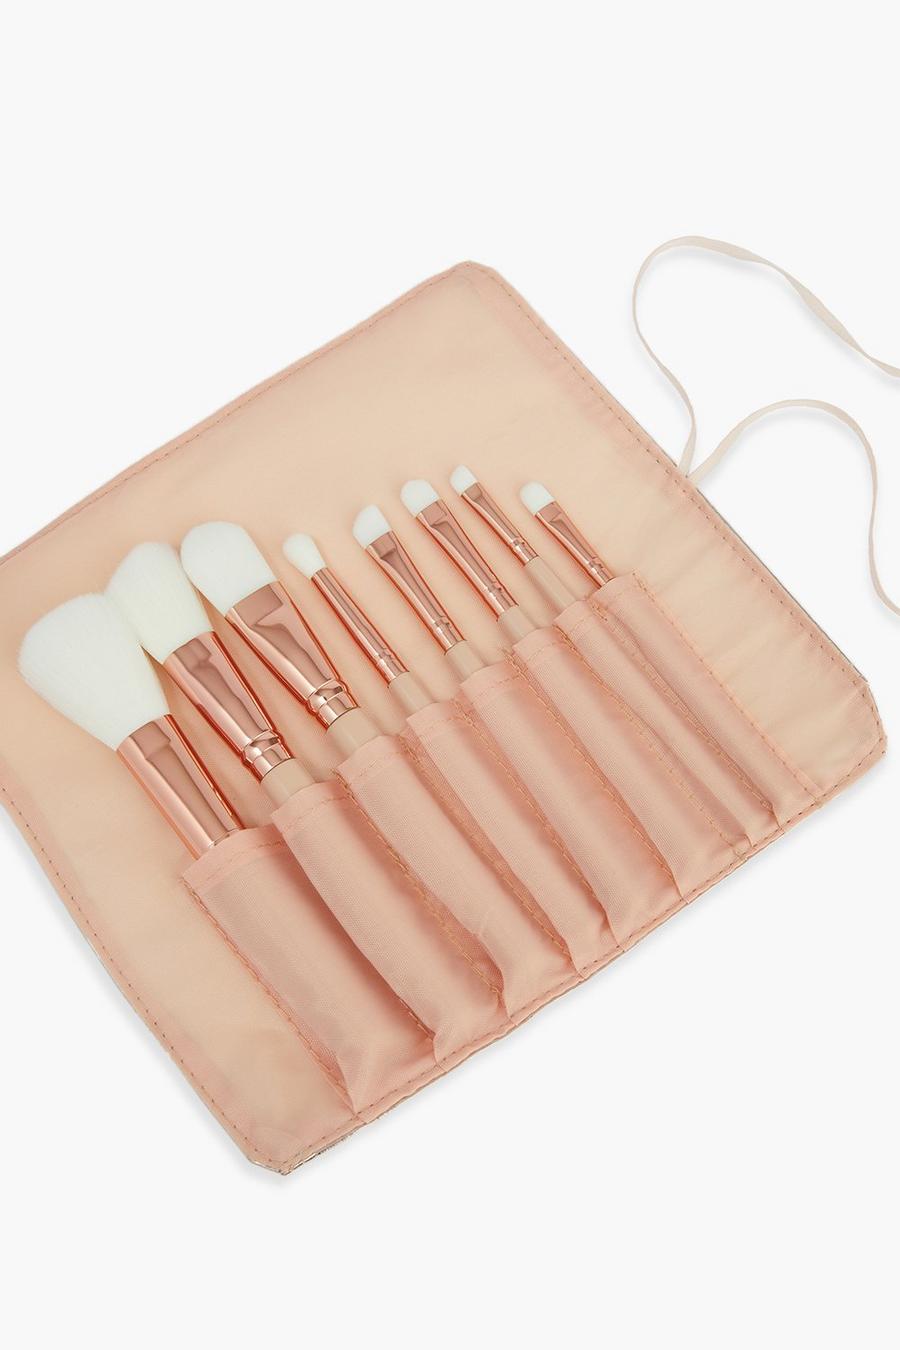 Academy Of Colour Pinsel-Set mit Rolle, Pink